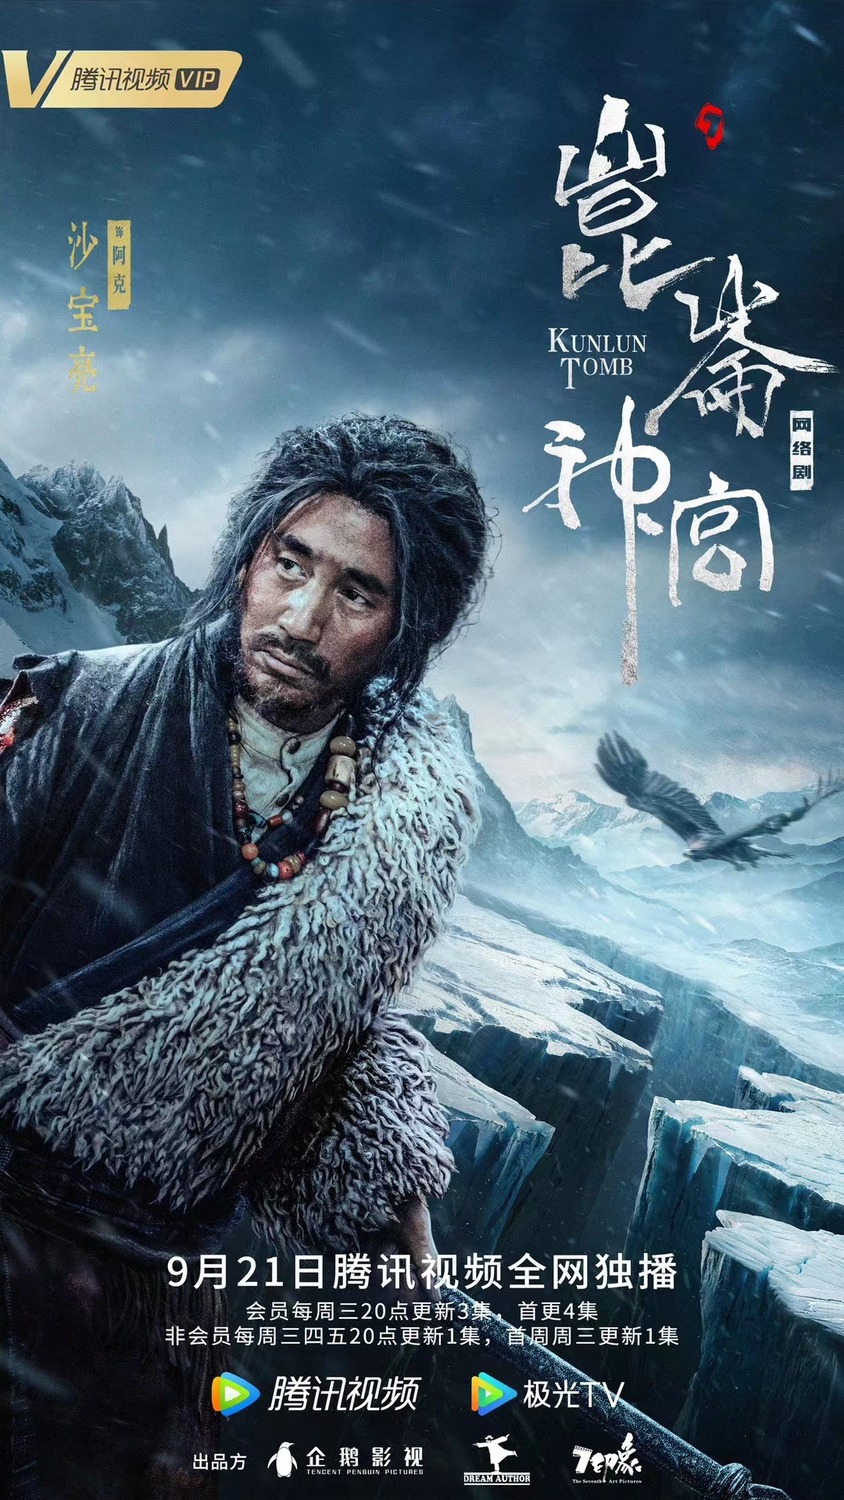 Extra Large TV Poster Image for Candle in the Tomb: Kunlun Tomb (#3 of 8)